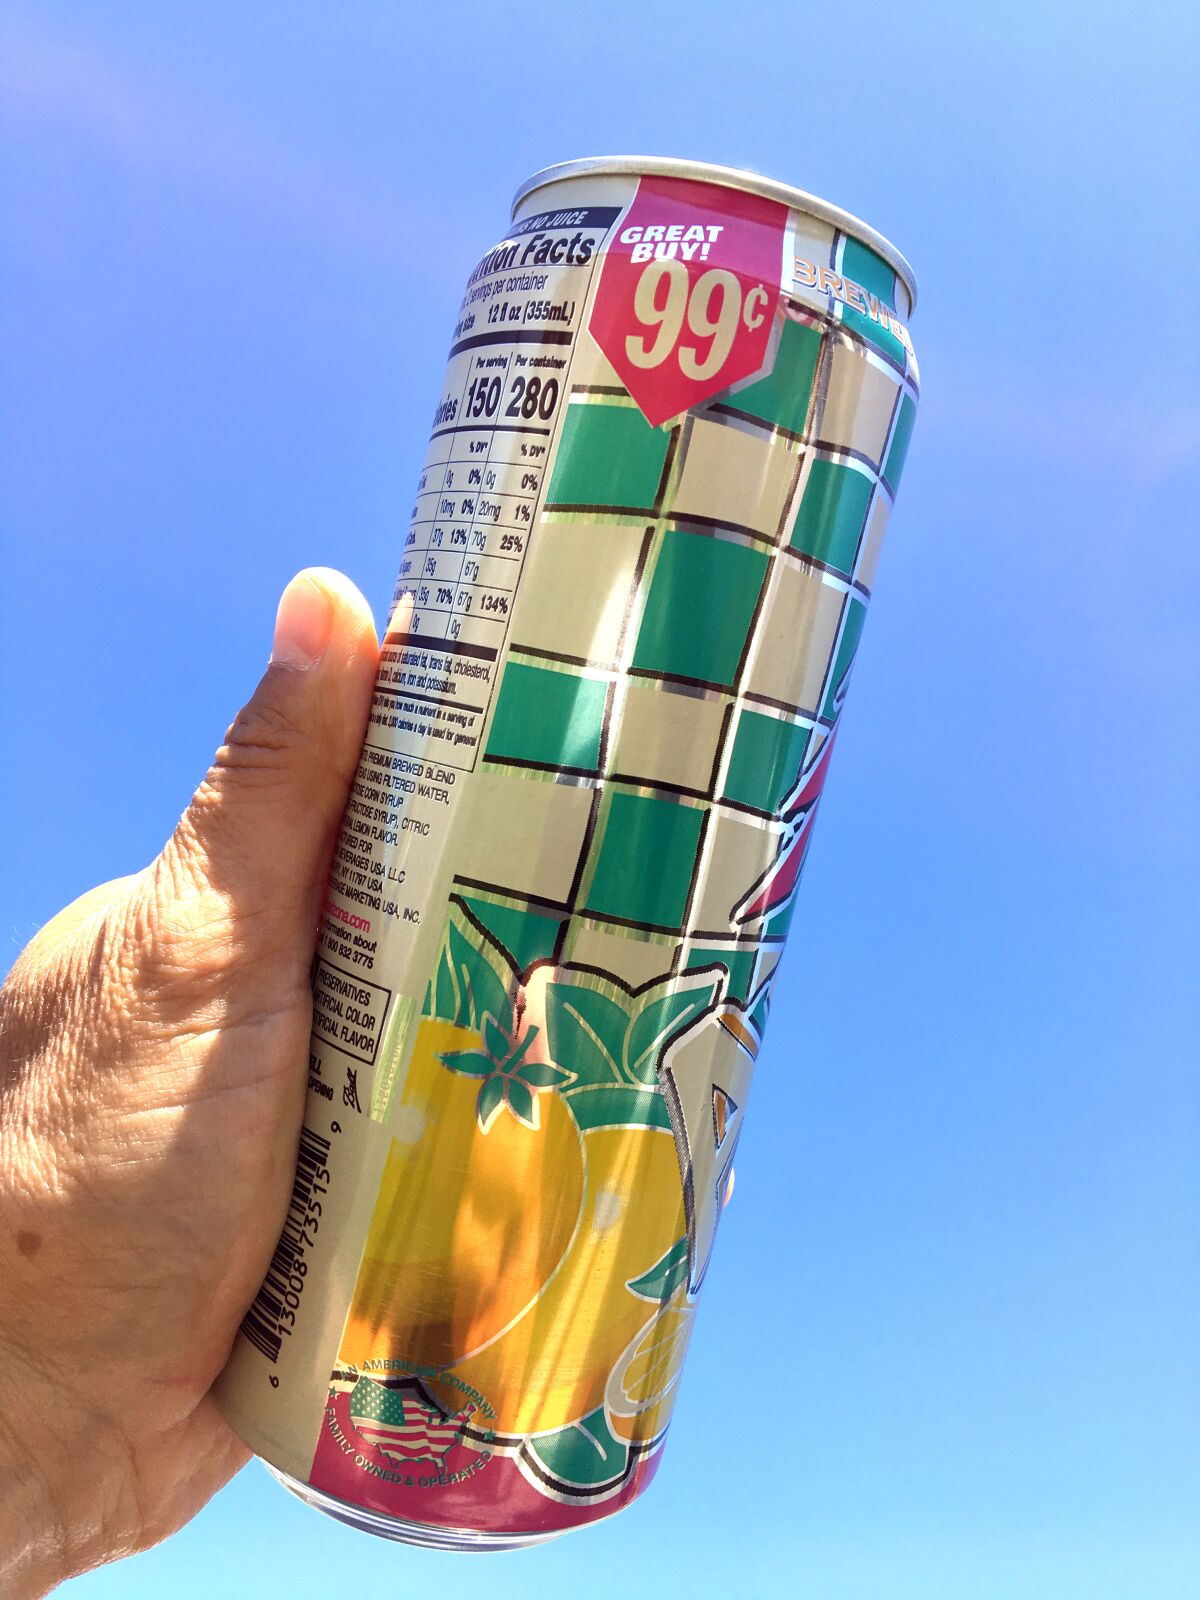 How is AriZona Iced Tea still 99 cents as inflation soars? Los